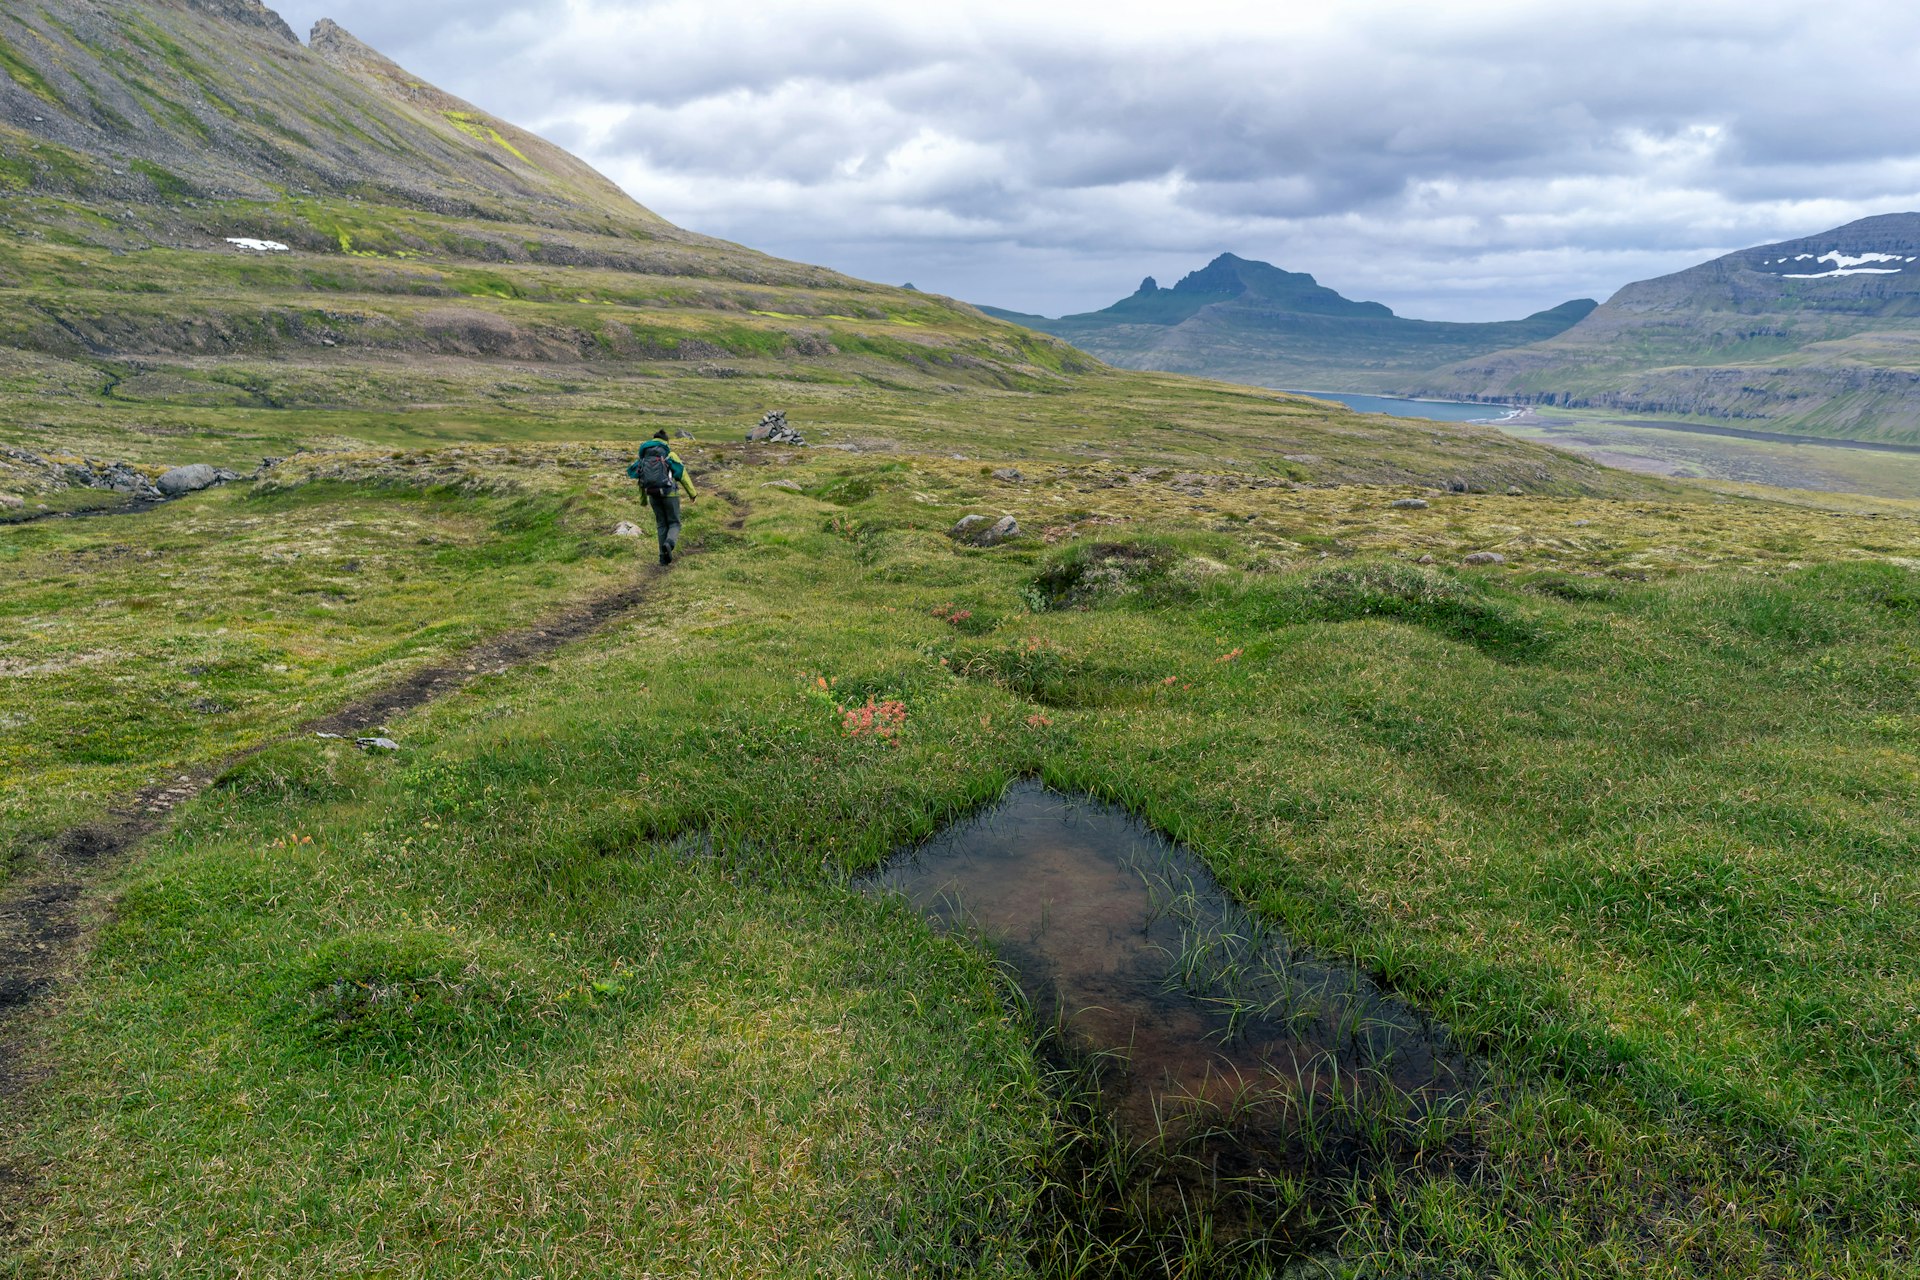 A hiker on a narrow path through a grassy valley, with clouds overhead